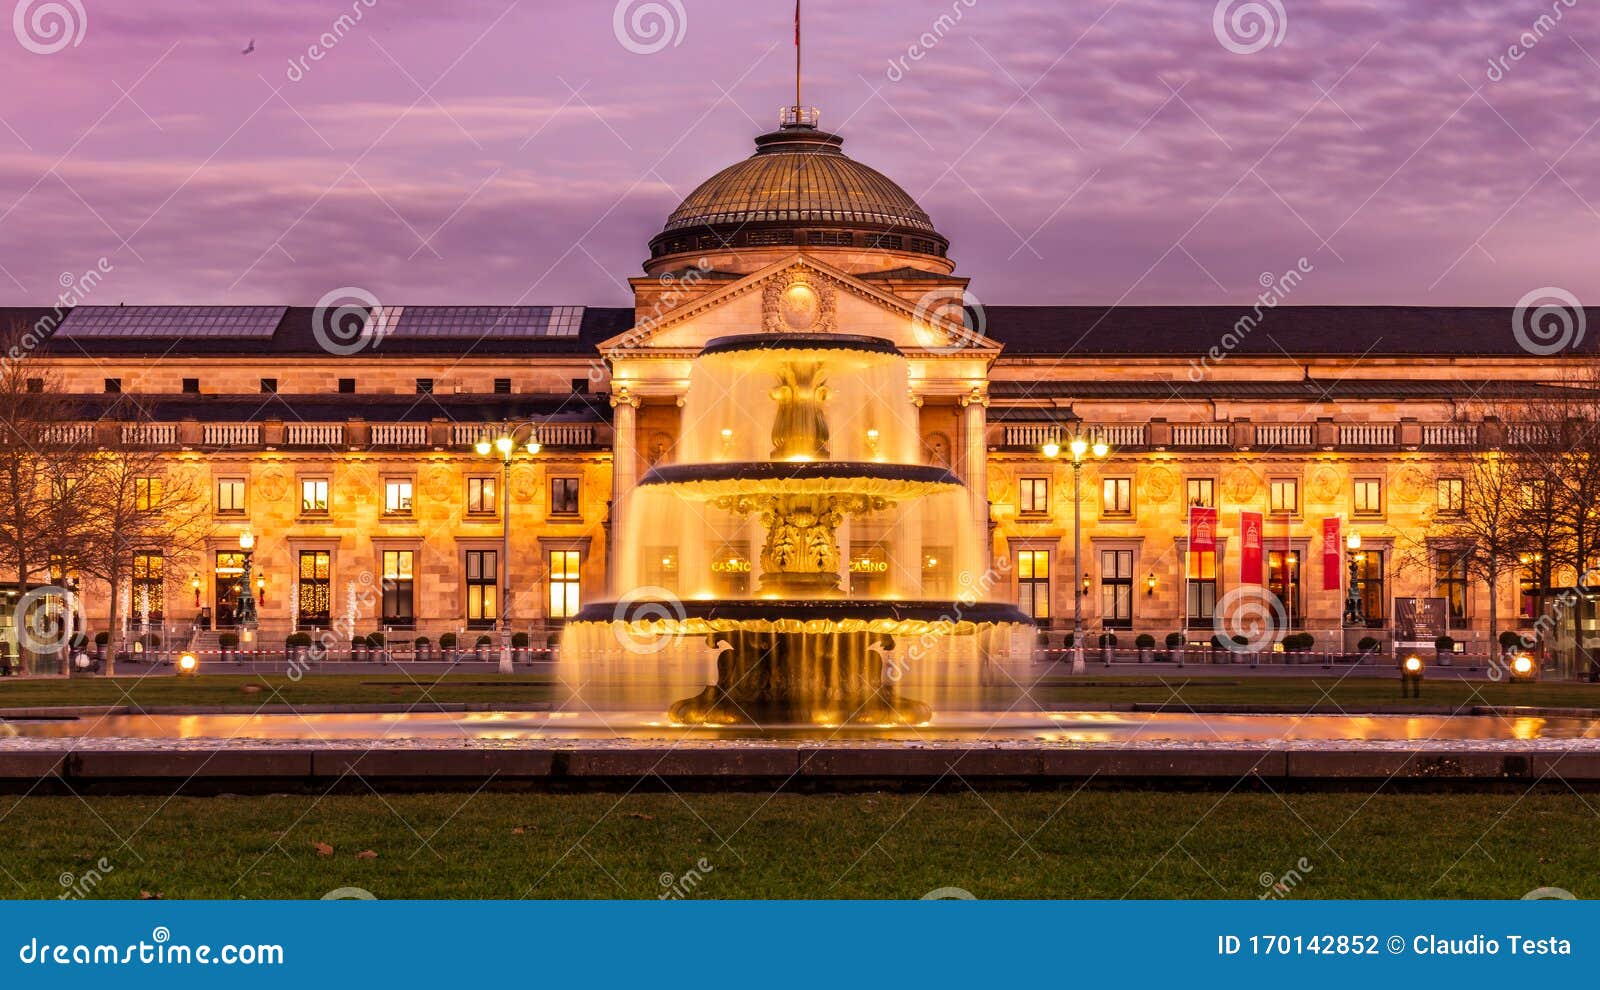 Wiesbaden Kurhaus And Casino Building With The Colors Of The